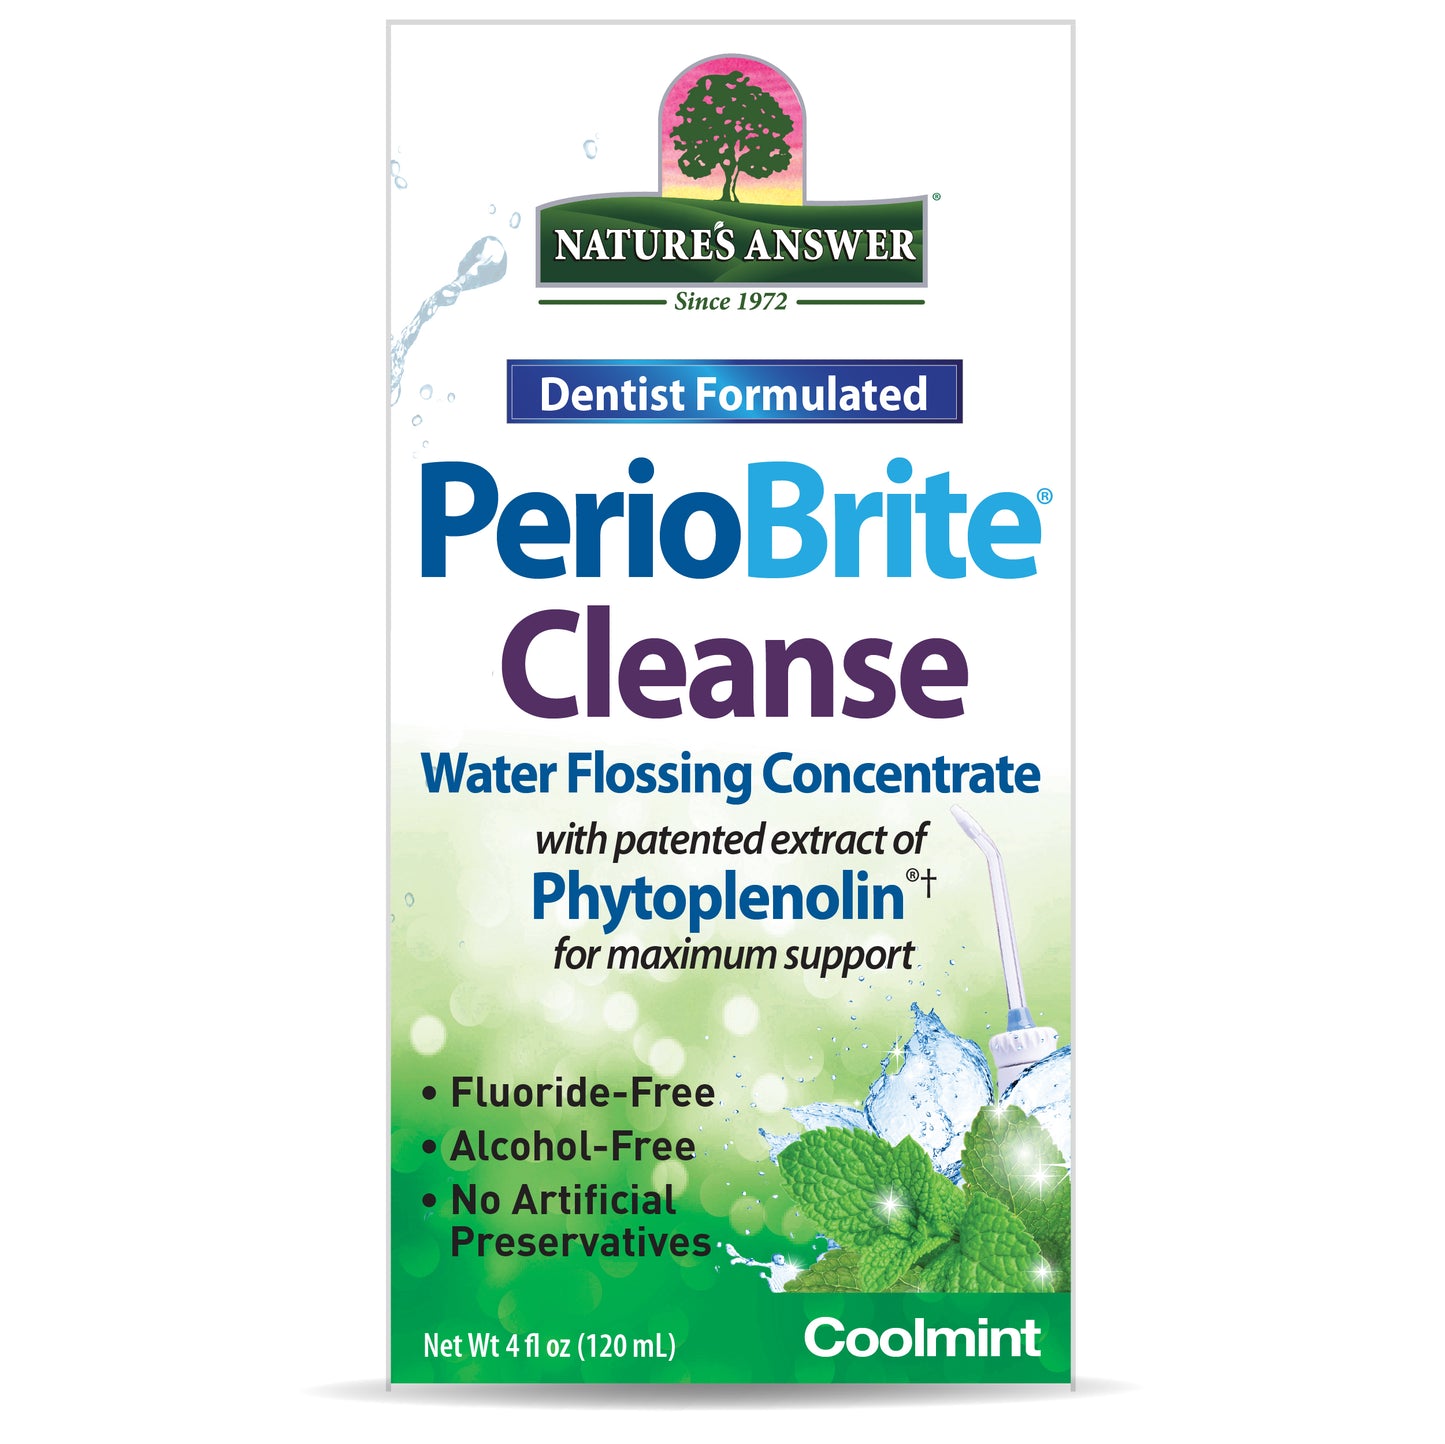 Natures Answer - PerioBrite Cleanse